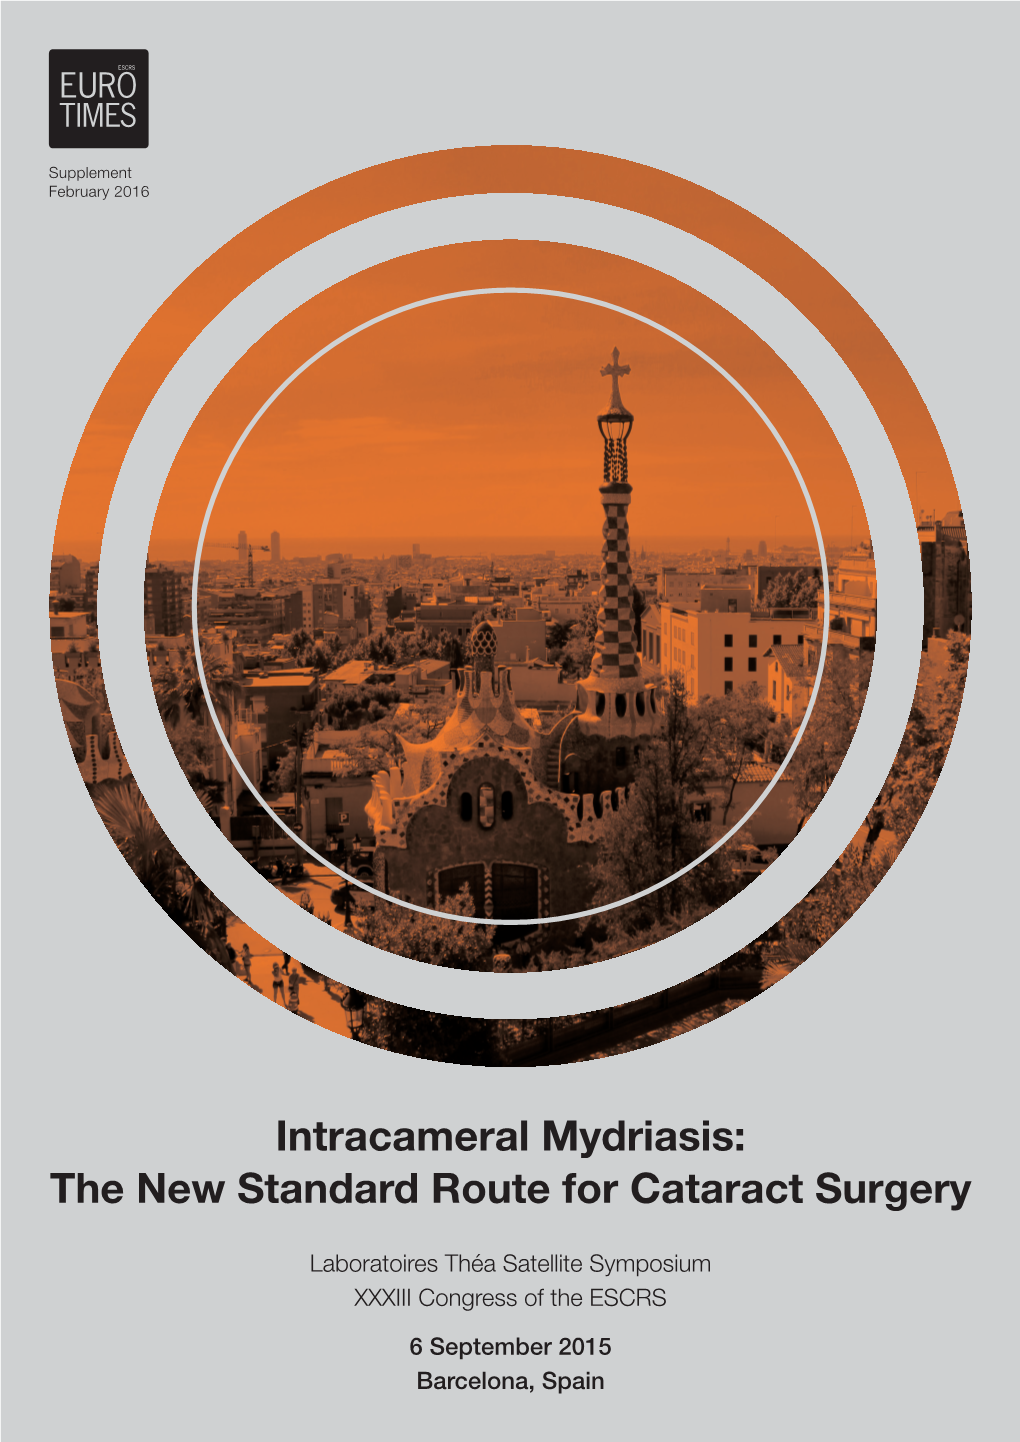 Intracameral Mydriasis: the New Standard Route for Cataract Surgery